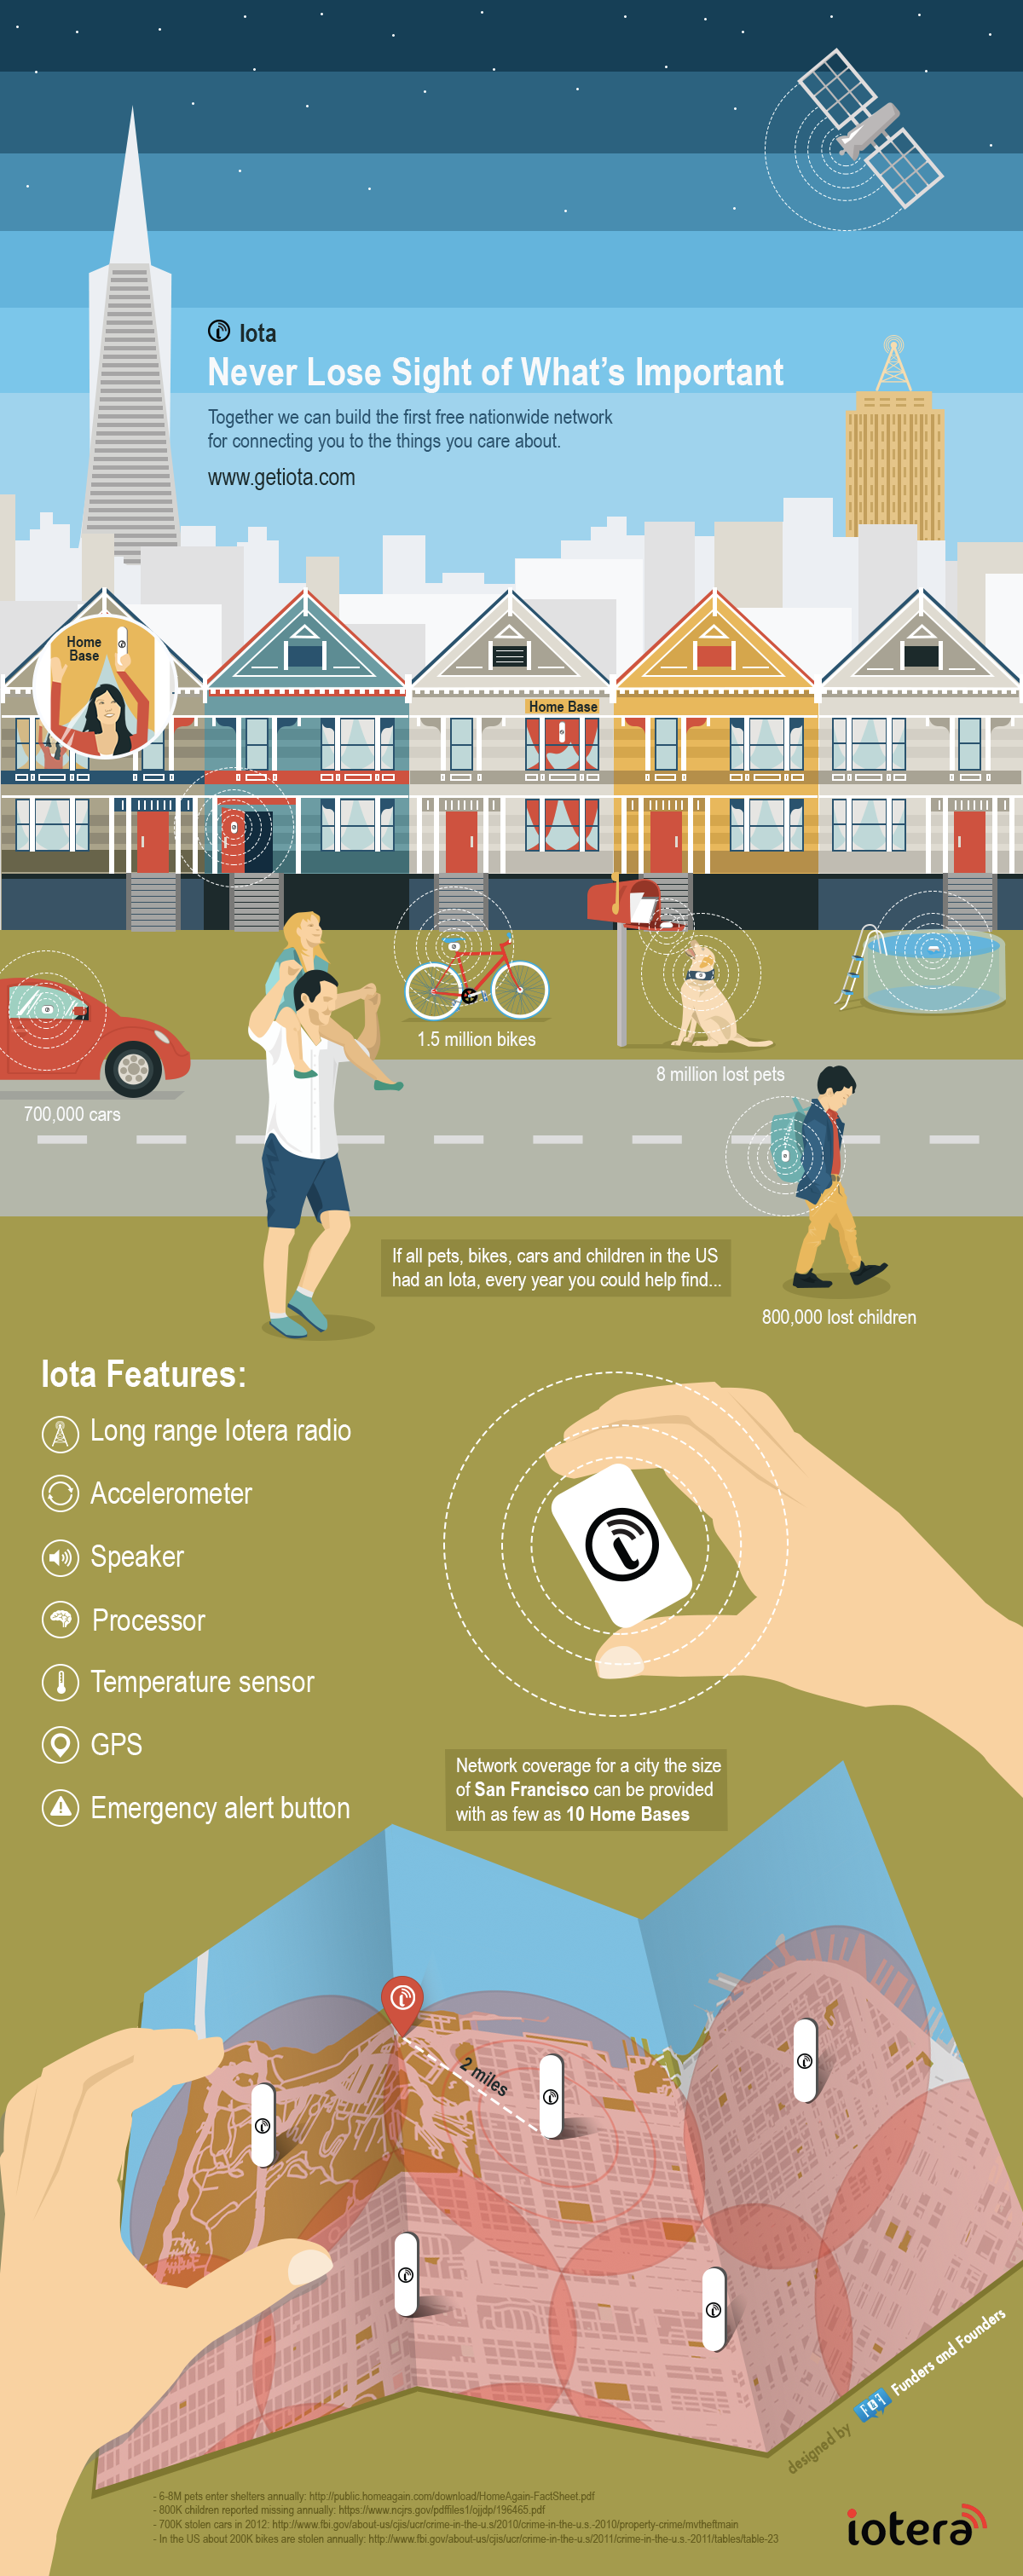 iota Iotera gps tracking device infographic story graphic Internet of Things IoT details tracking Technology san francisco vision future cityscape